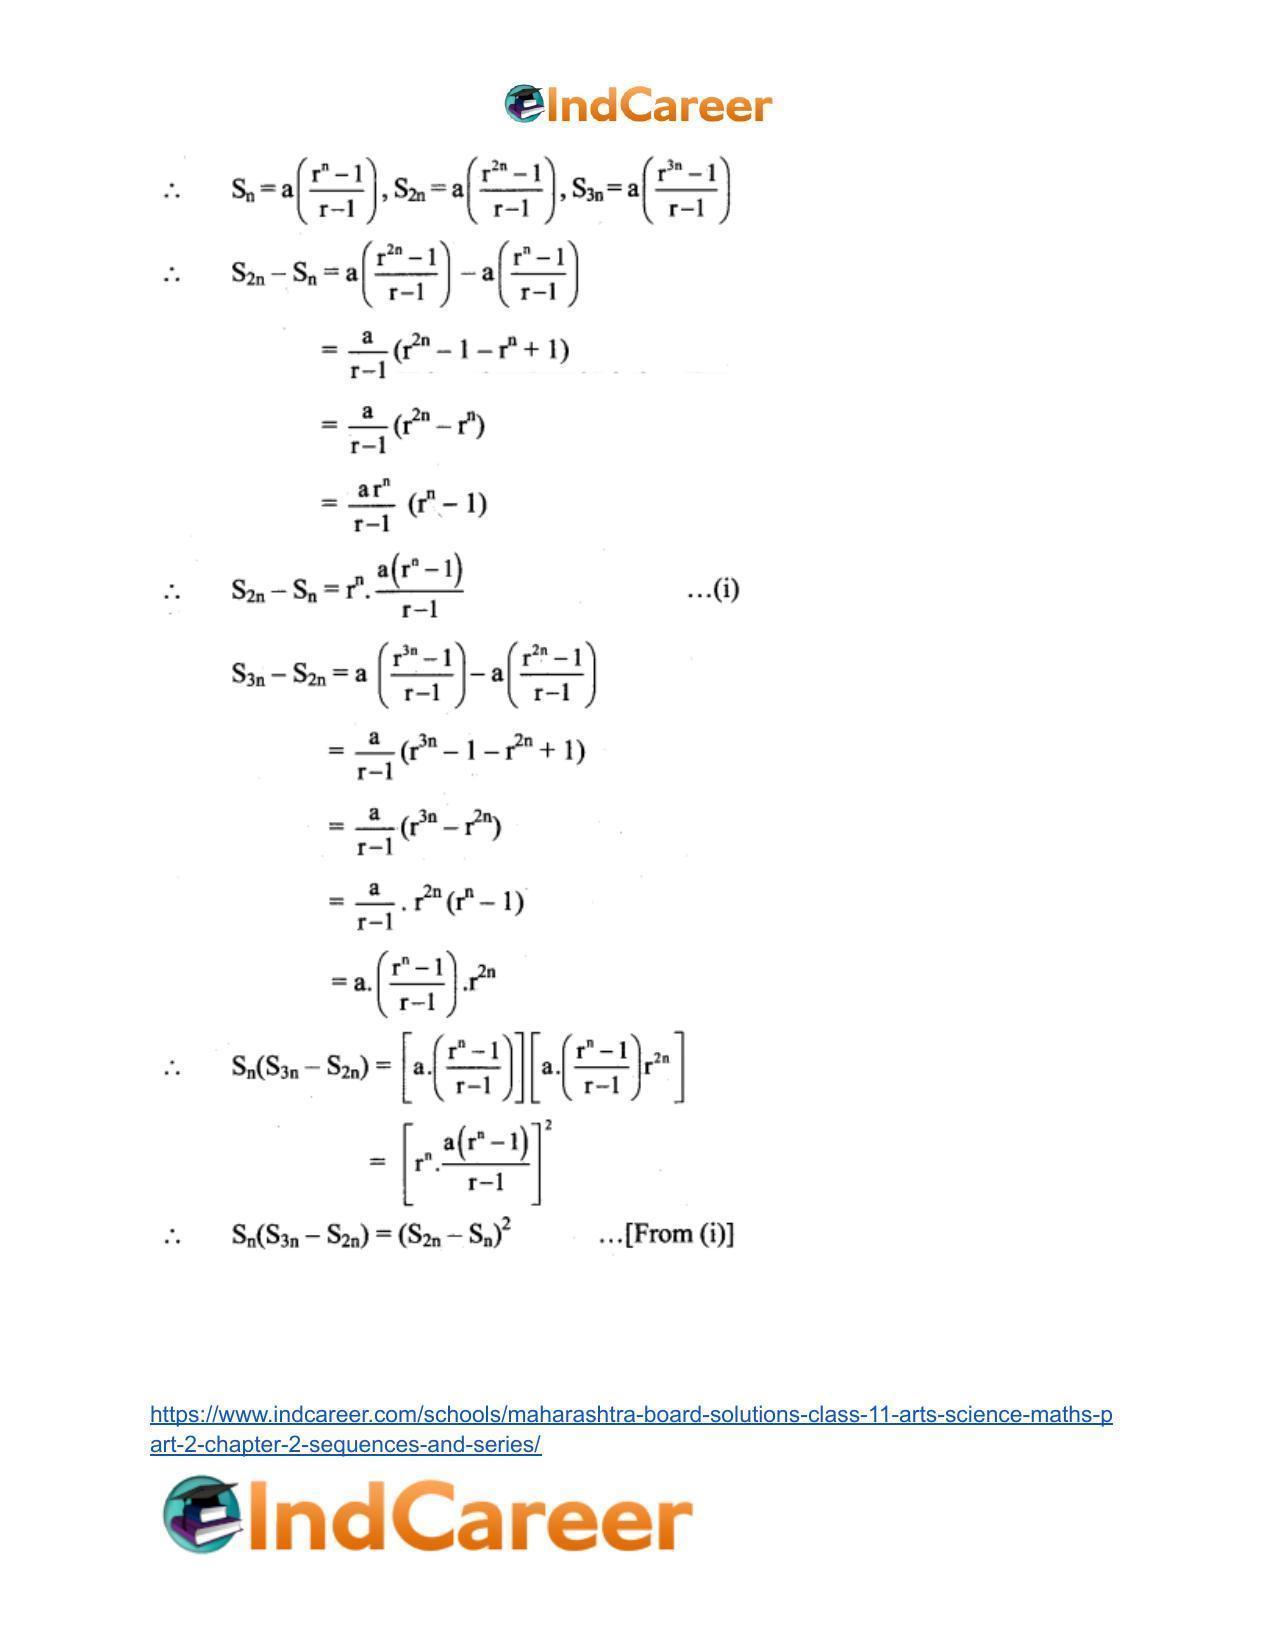 Maharashtra Board Solutions Class 11-Arts & Science Maths (Part 2): Chapter 2- Sequences and Series - Page 36